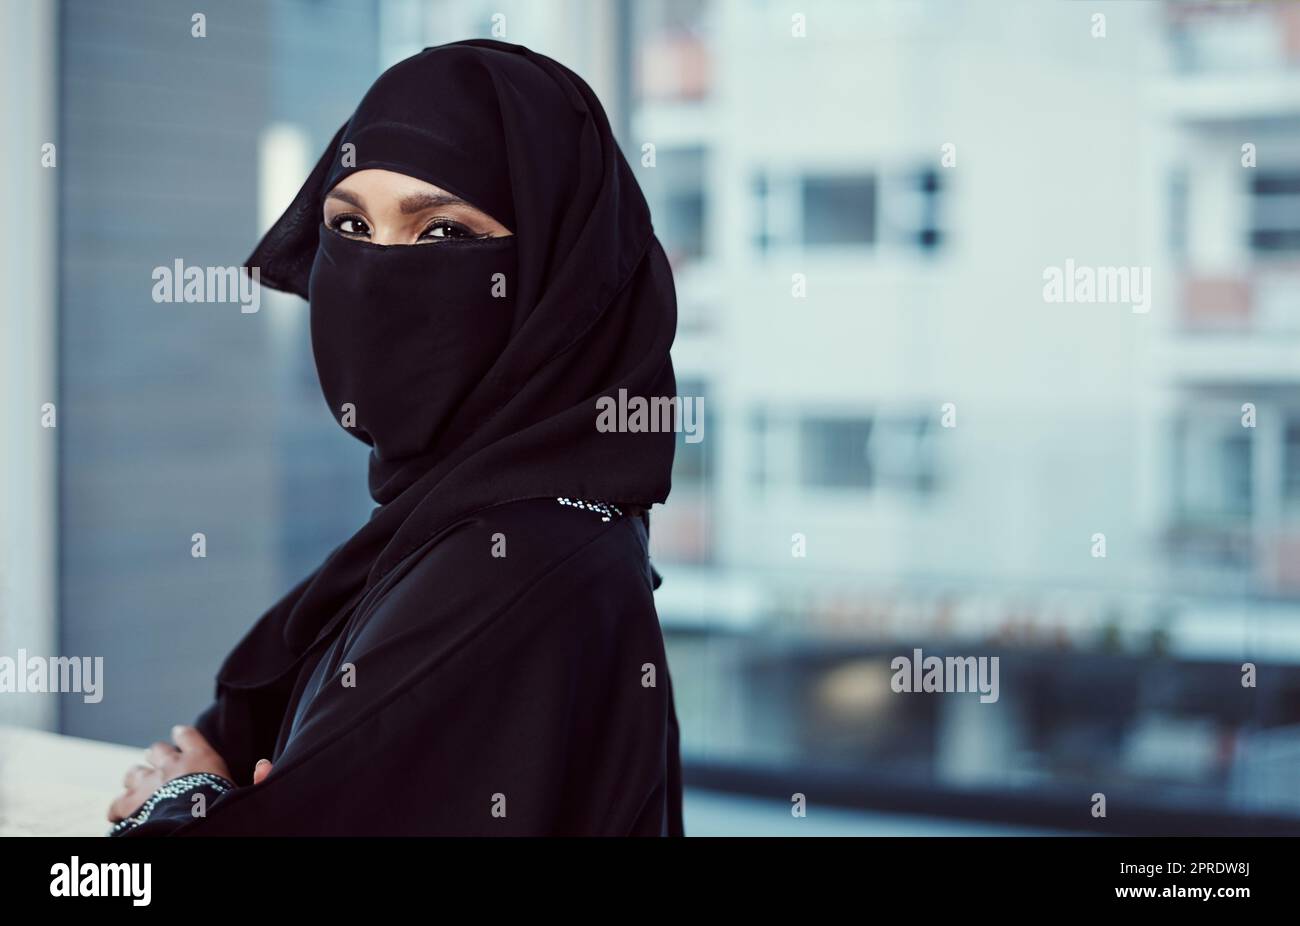 Im in get it done mode. Cropped portrait of an arabic businesswoman in a burka standing in her office. Stock Photo